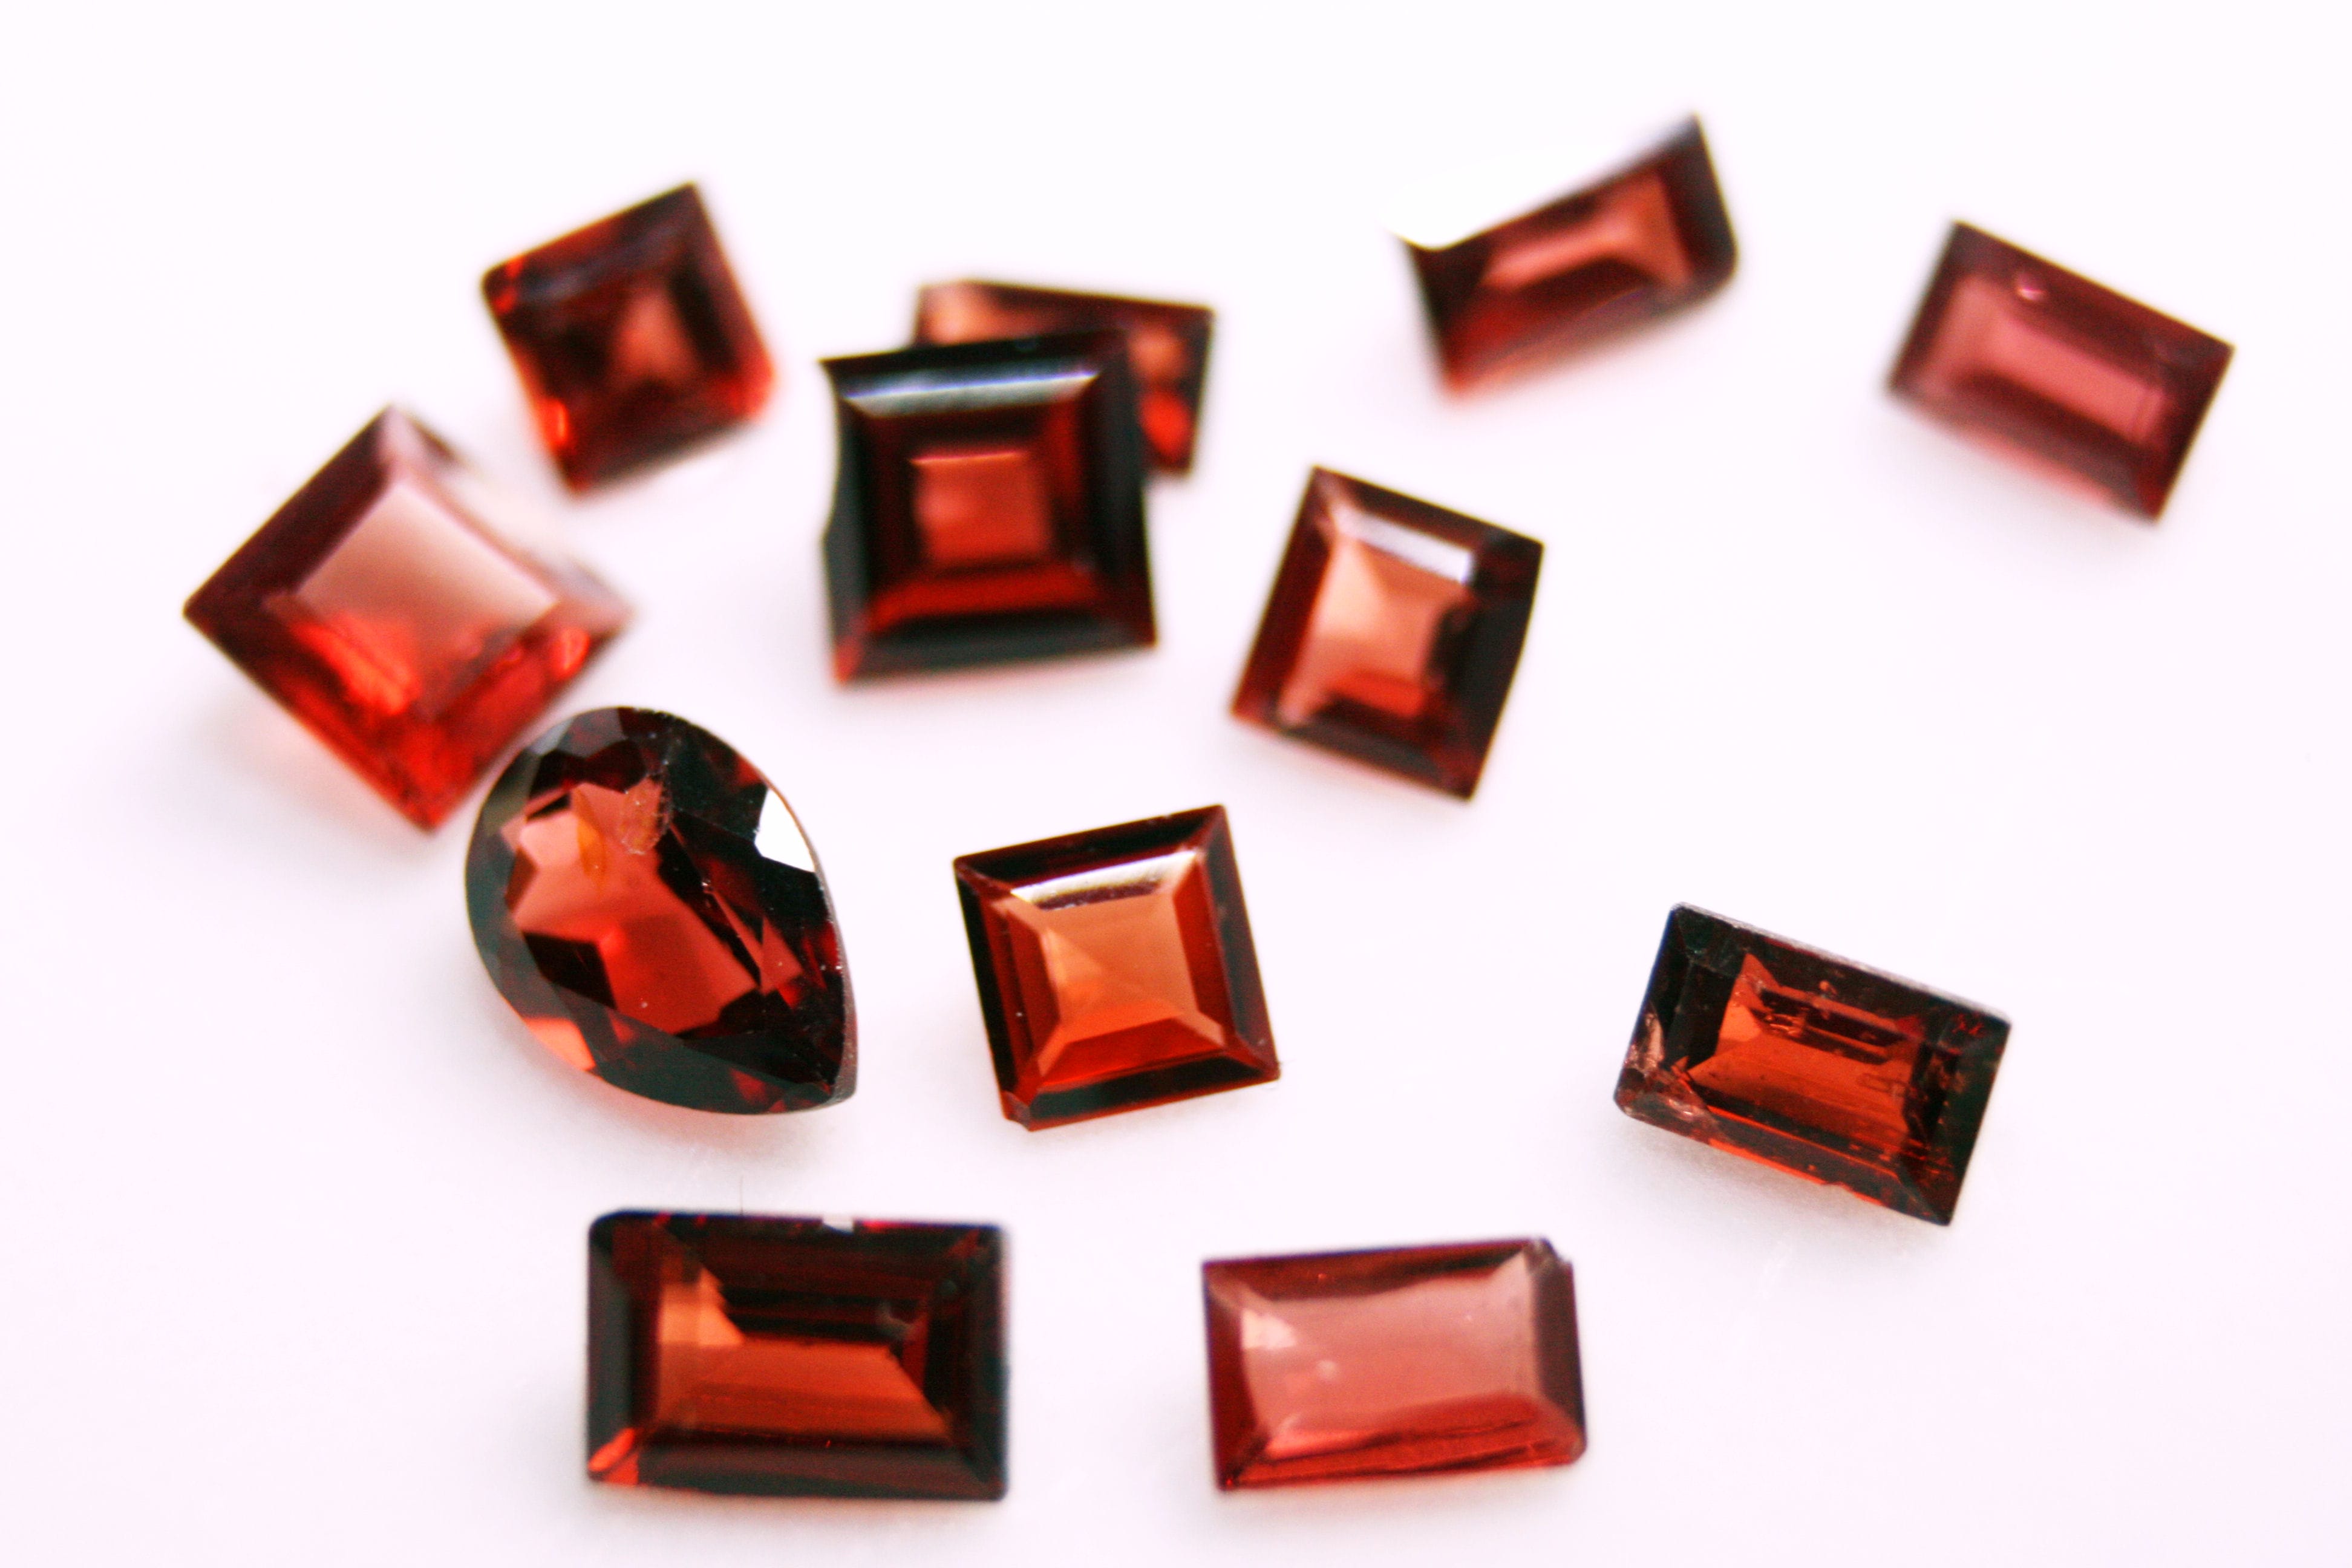 Garnet helps to heal the root chakra by enhancing one's spiritual awareness